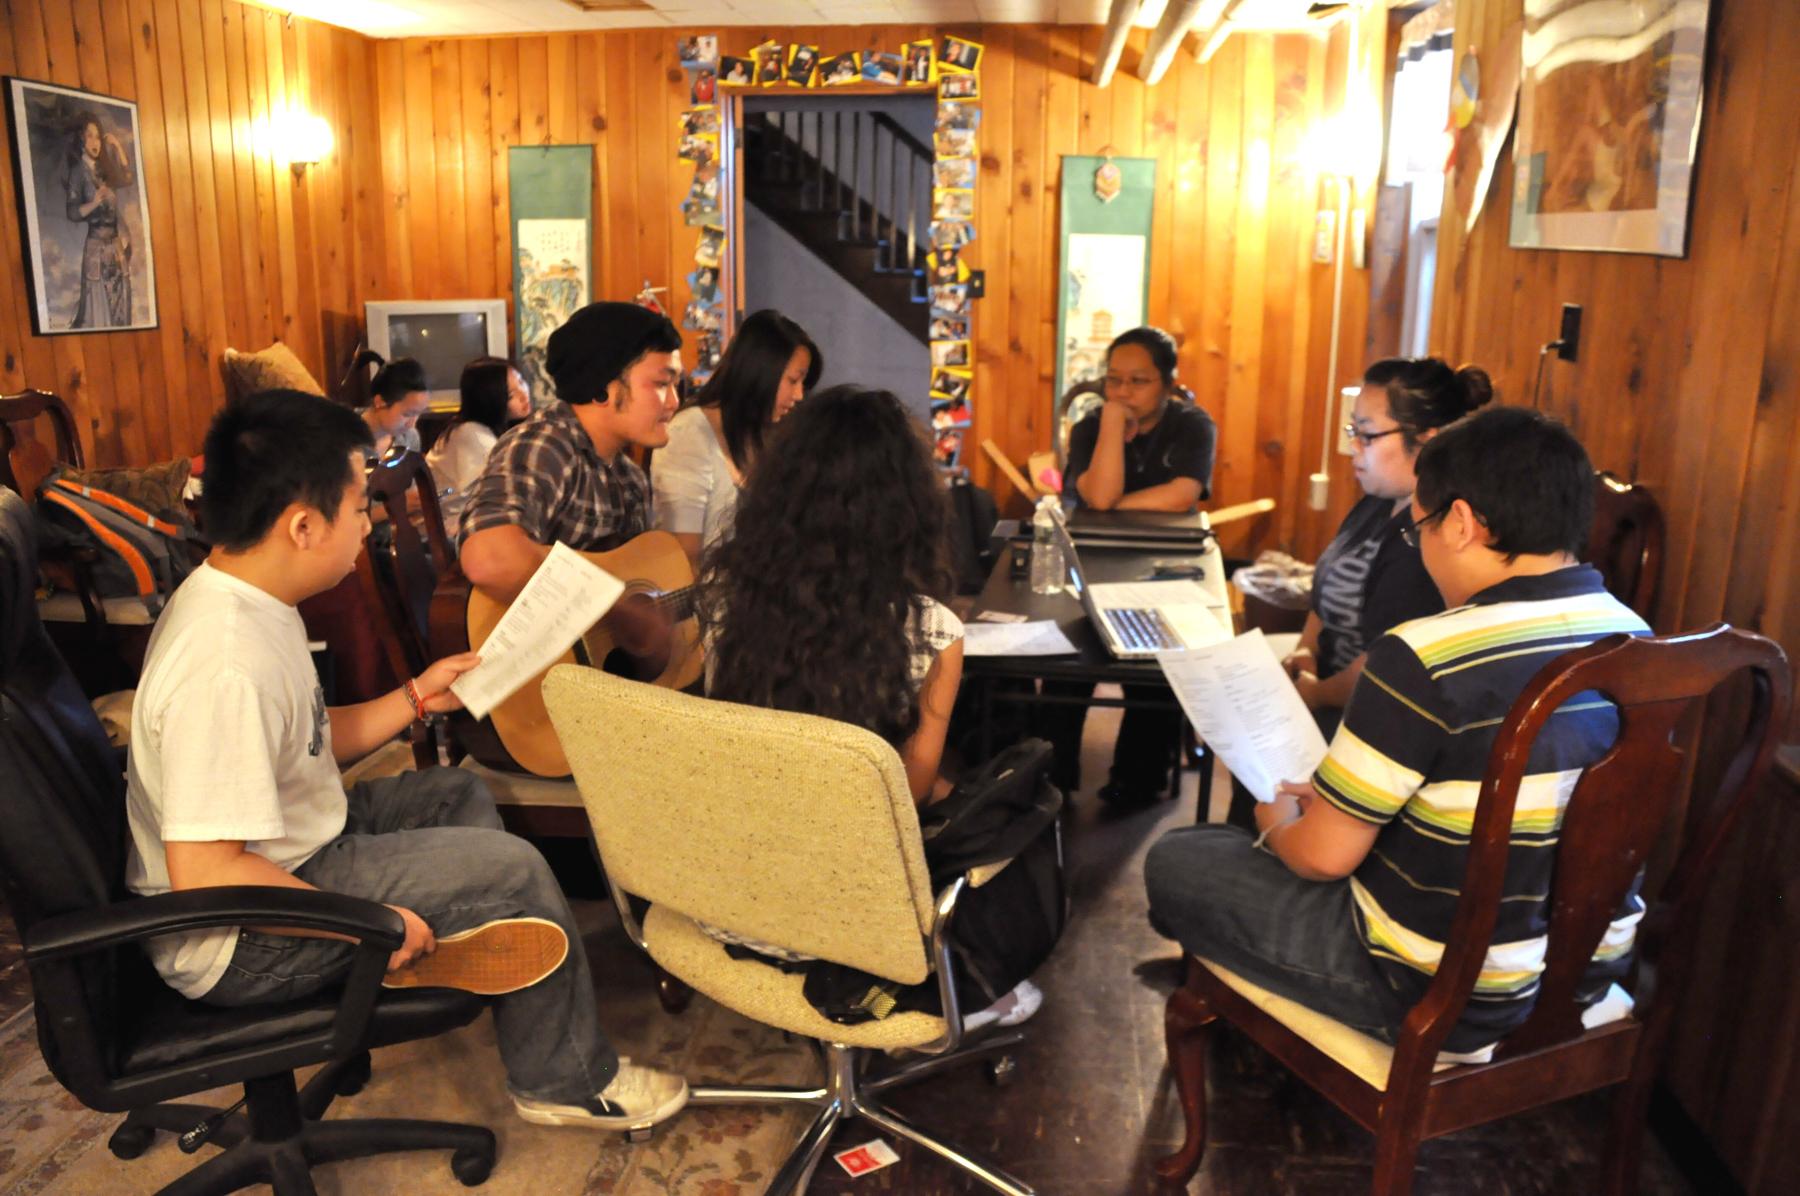 Students sitting in a circle playing music in the Hmong Center